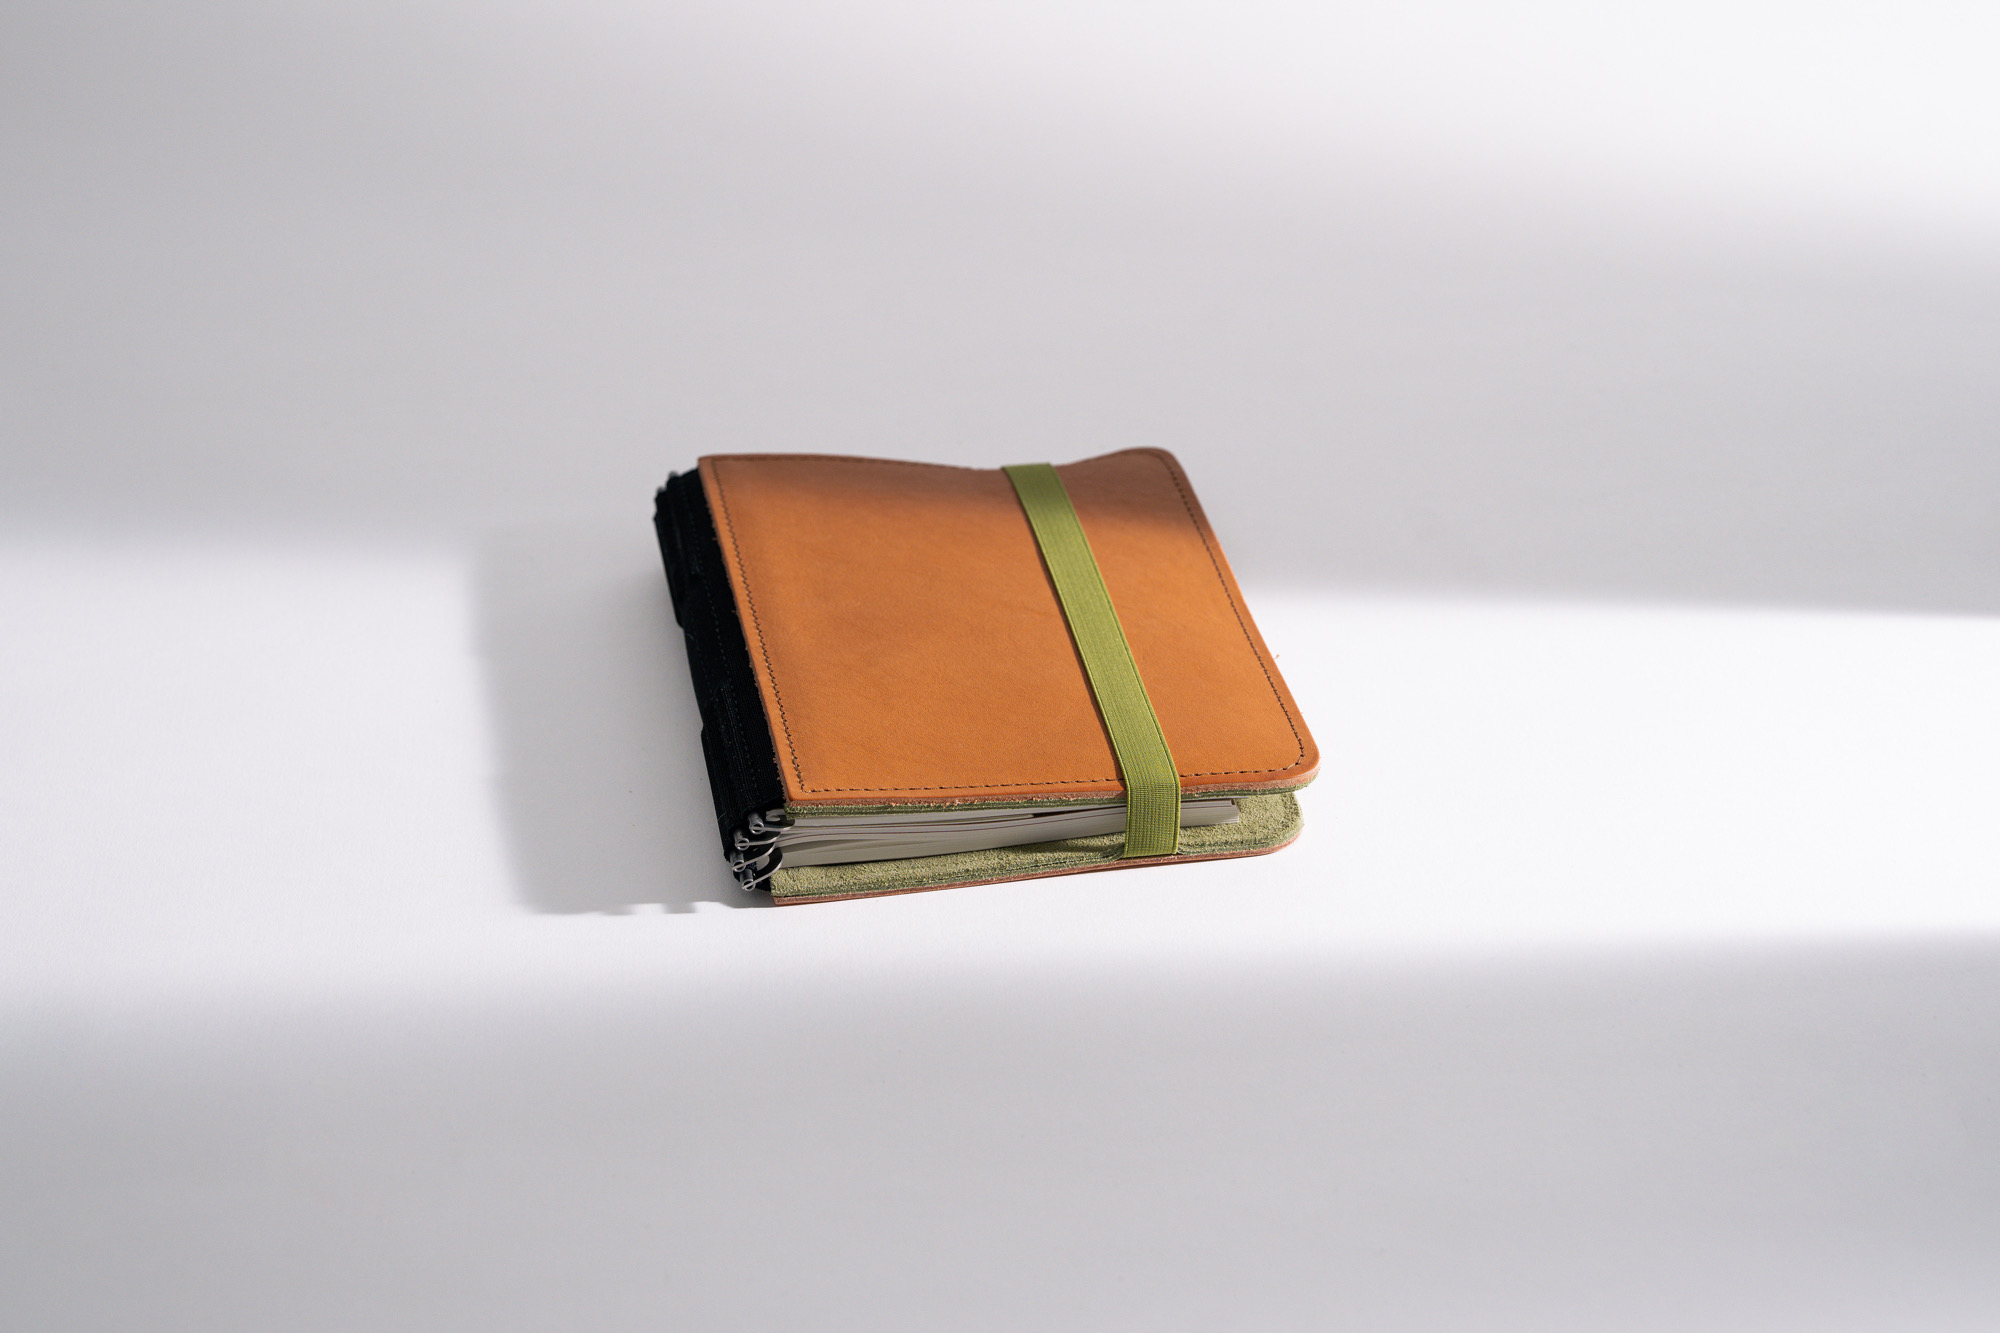 Classic companion made from sturdy vegetable-tanned cowhide. Featuring chrome-free suede, elastic closure band, and pen loop. Numerous interior pockets for business cards, smartphone, or tablet. Size M (A5).